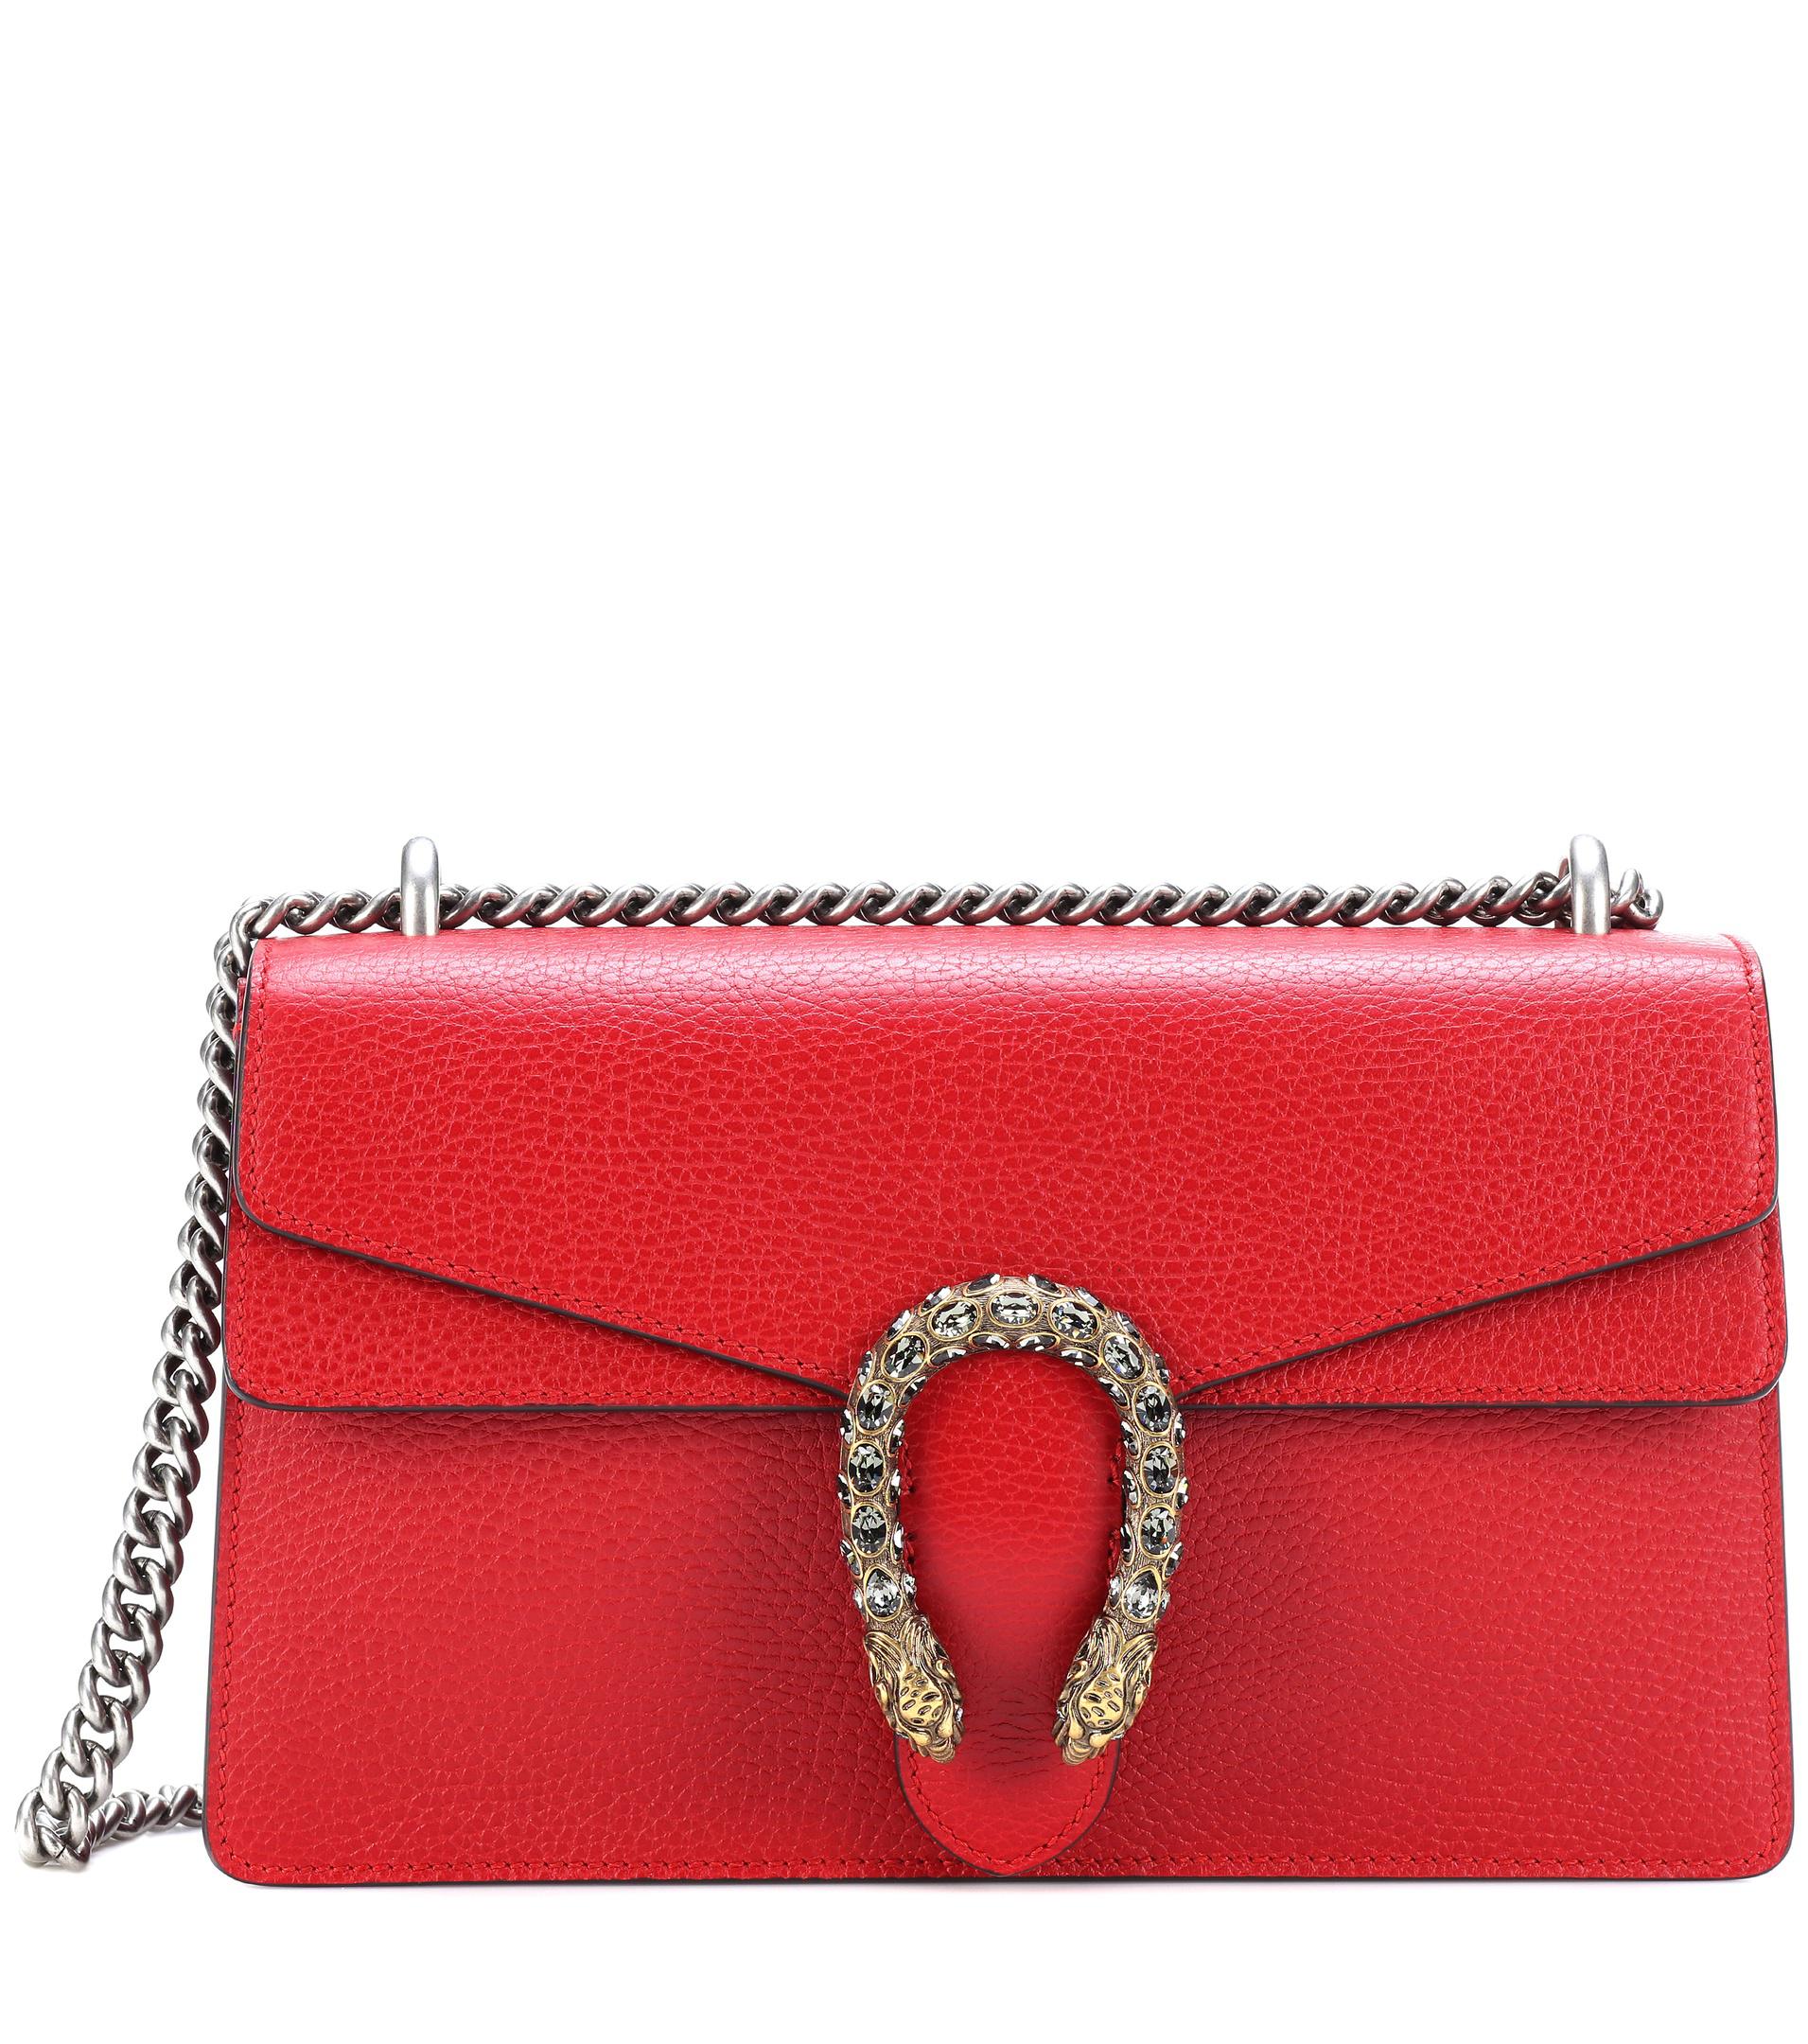 Lyst - Gucci Dionysus Leather Shoulder Bag in Red